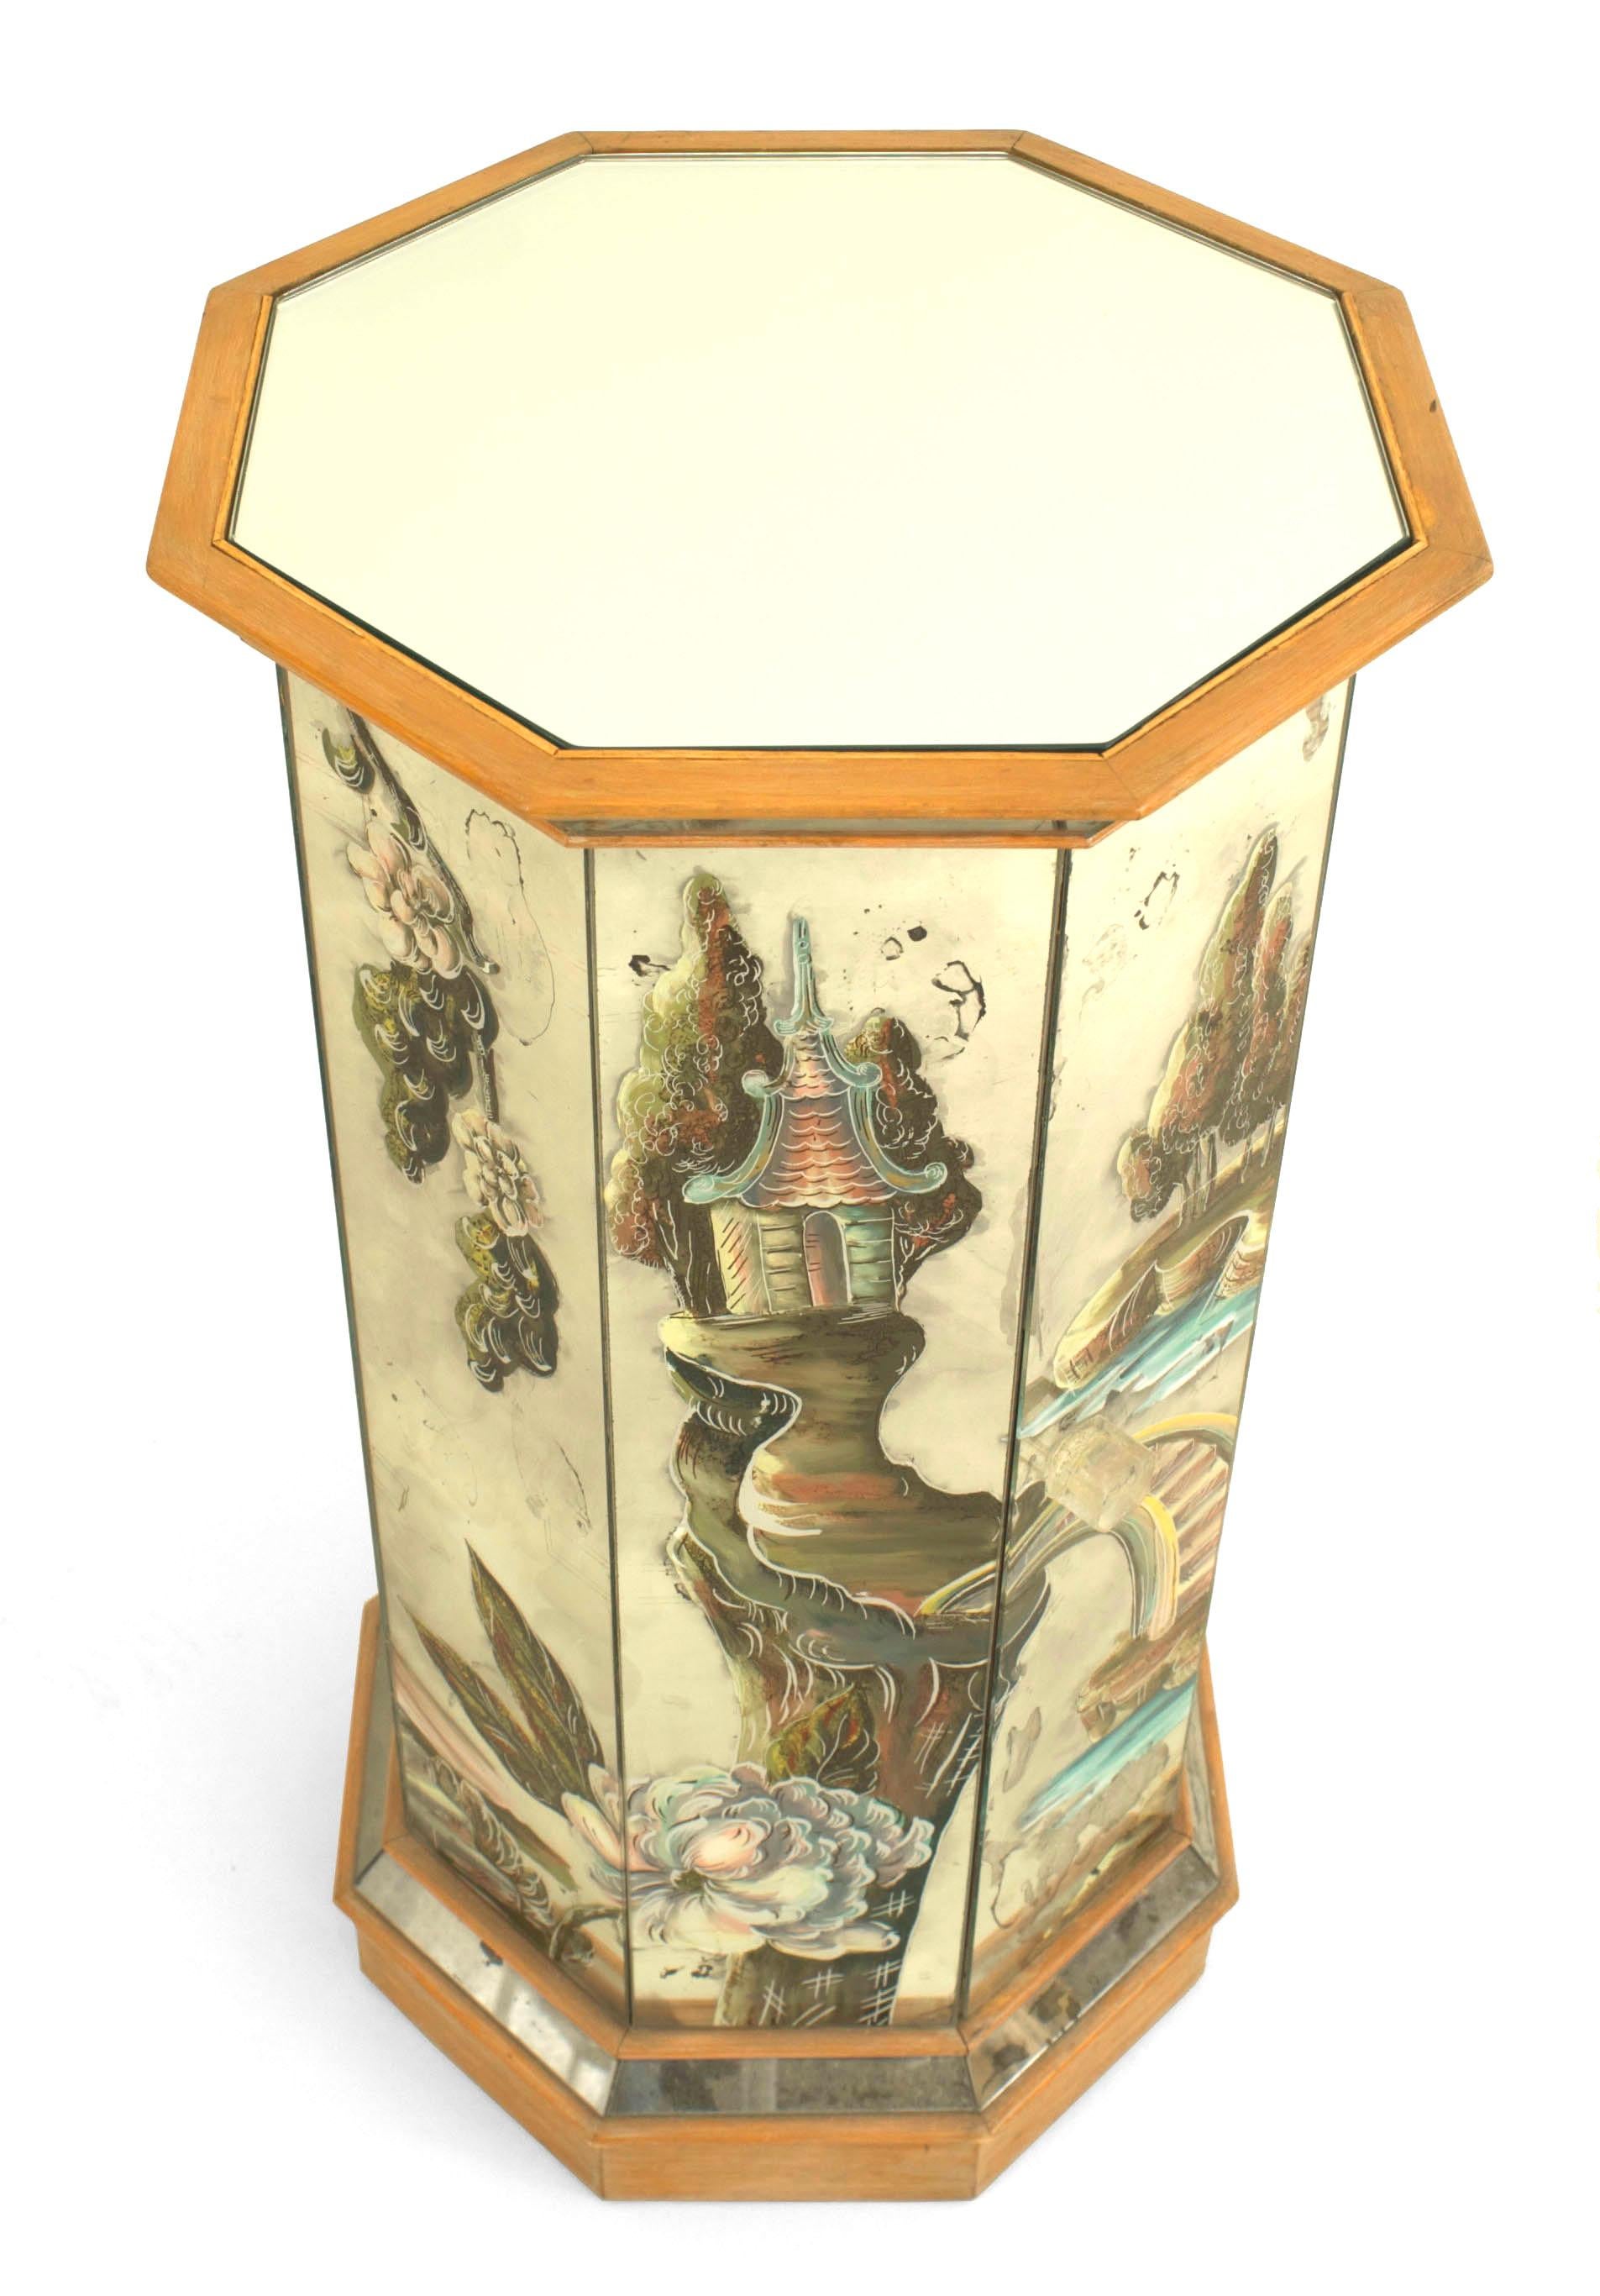 1940's French octagonal shaped pedestal with storage concealed behind a door. The mirrored glass exterior is decorated in painted Chinoiserie designs.